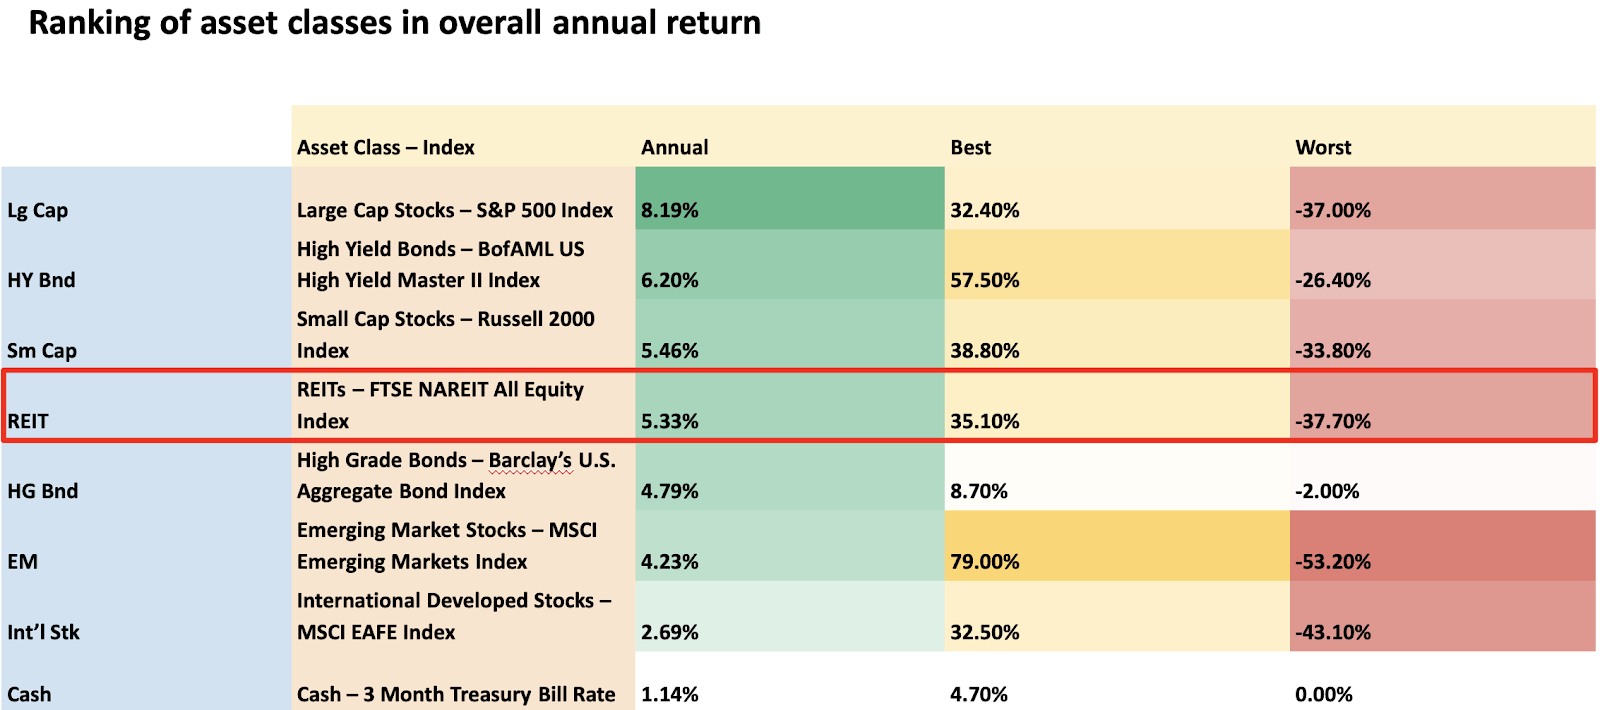 REITs Is The Most Consistent Asset Class Providing The Best Return Over